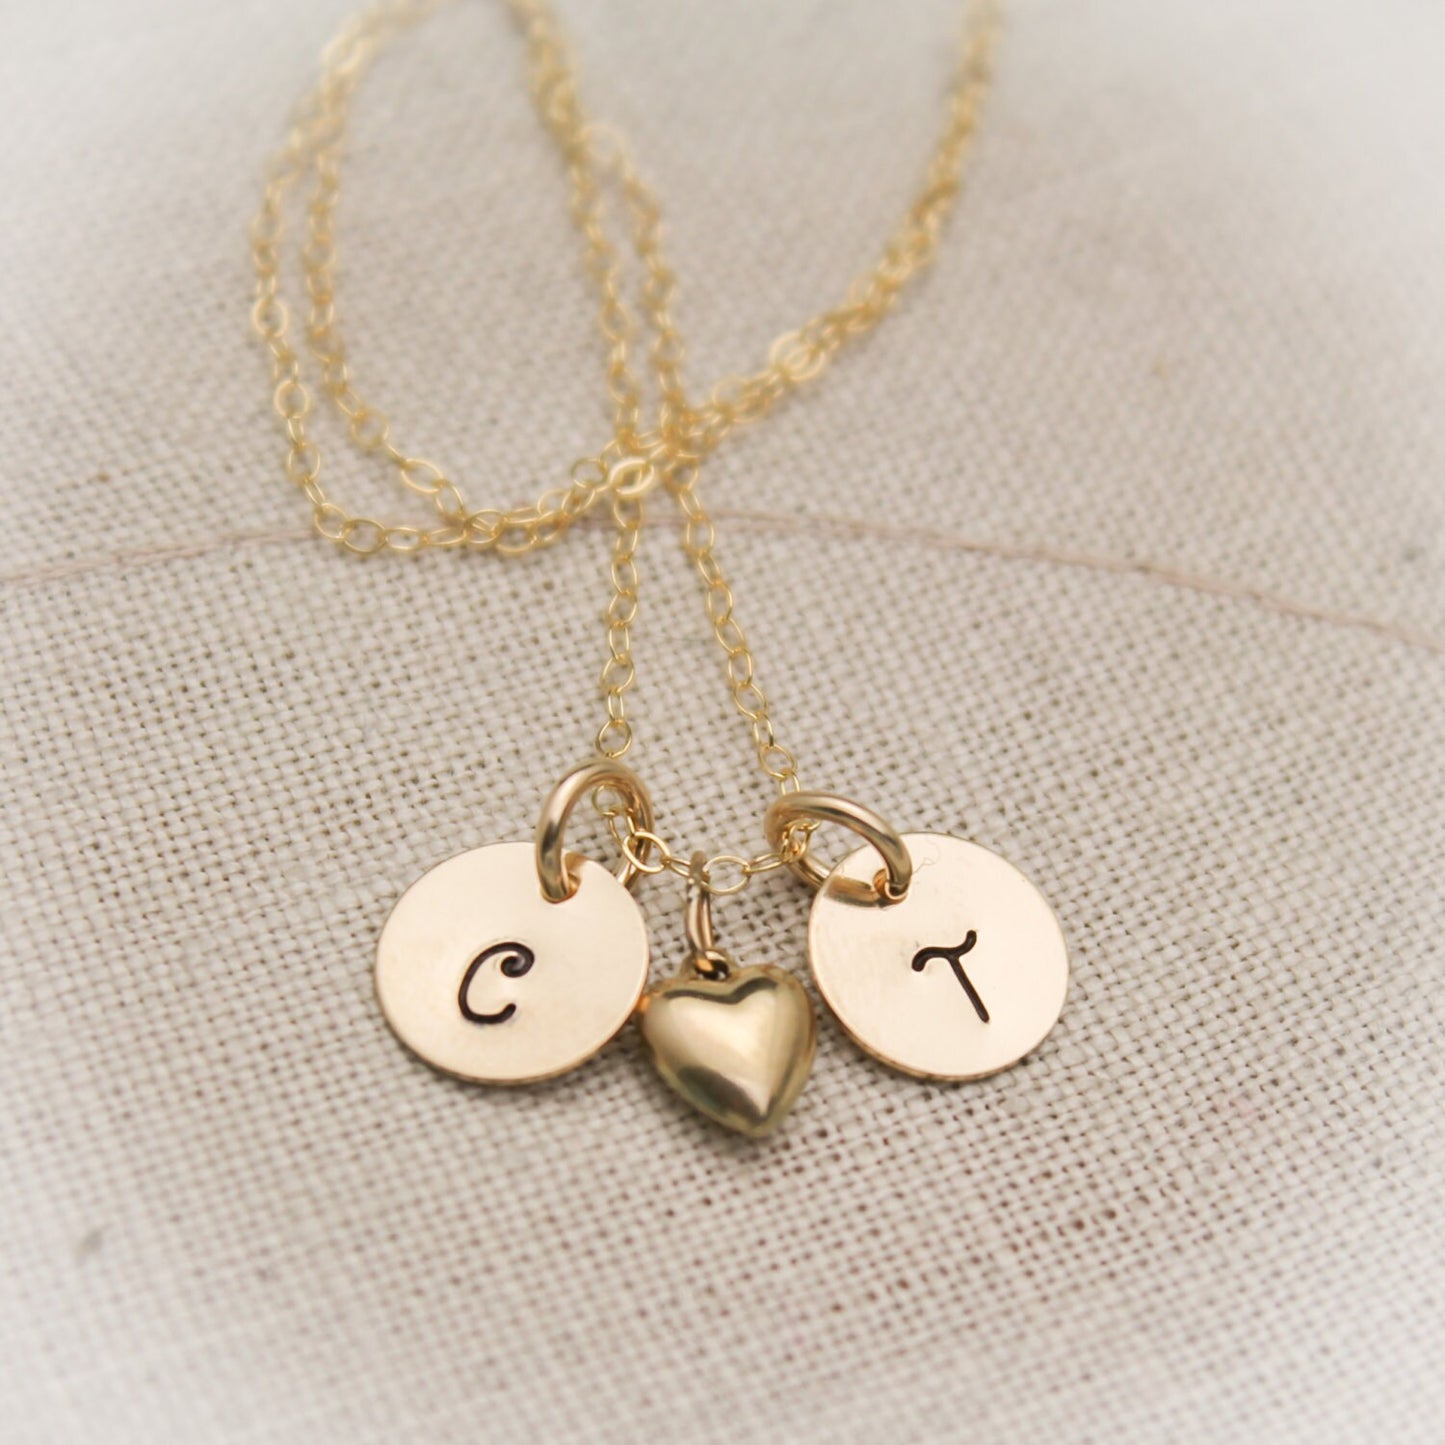 14K Gold Filled Couples Two Initial Monogram Necklace with Heart Charm  Personalized Hand Stamped Jewelry